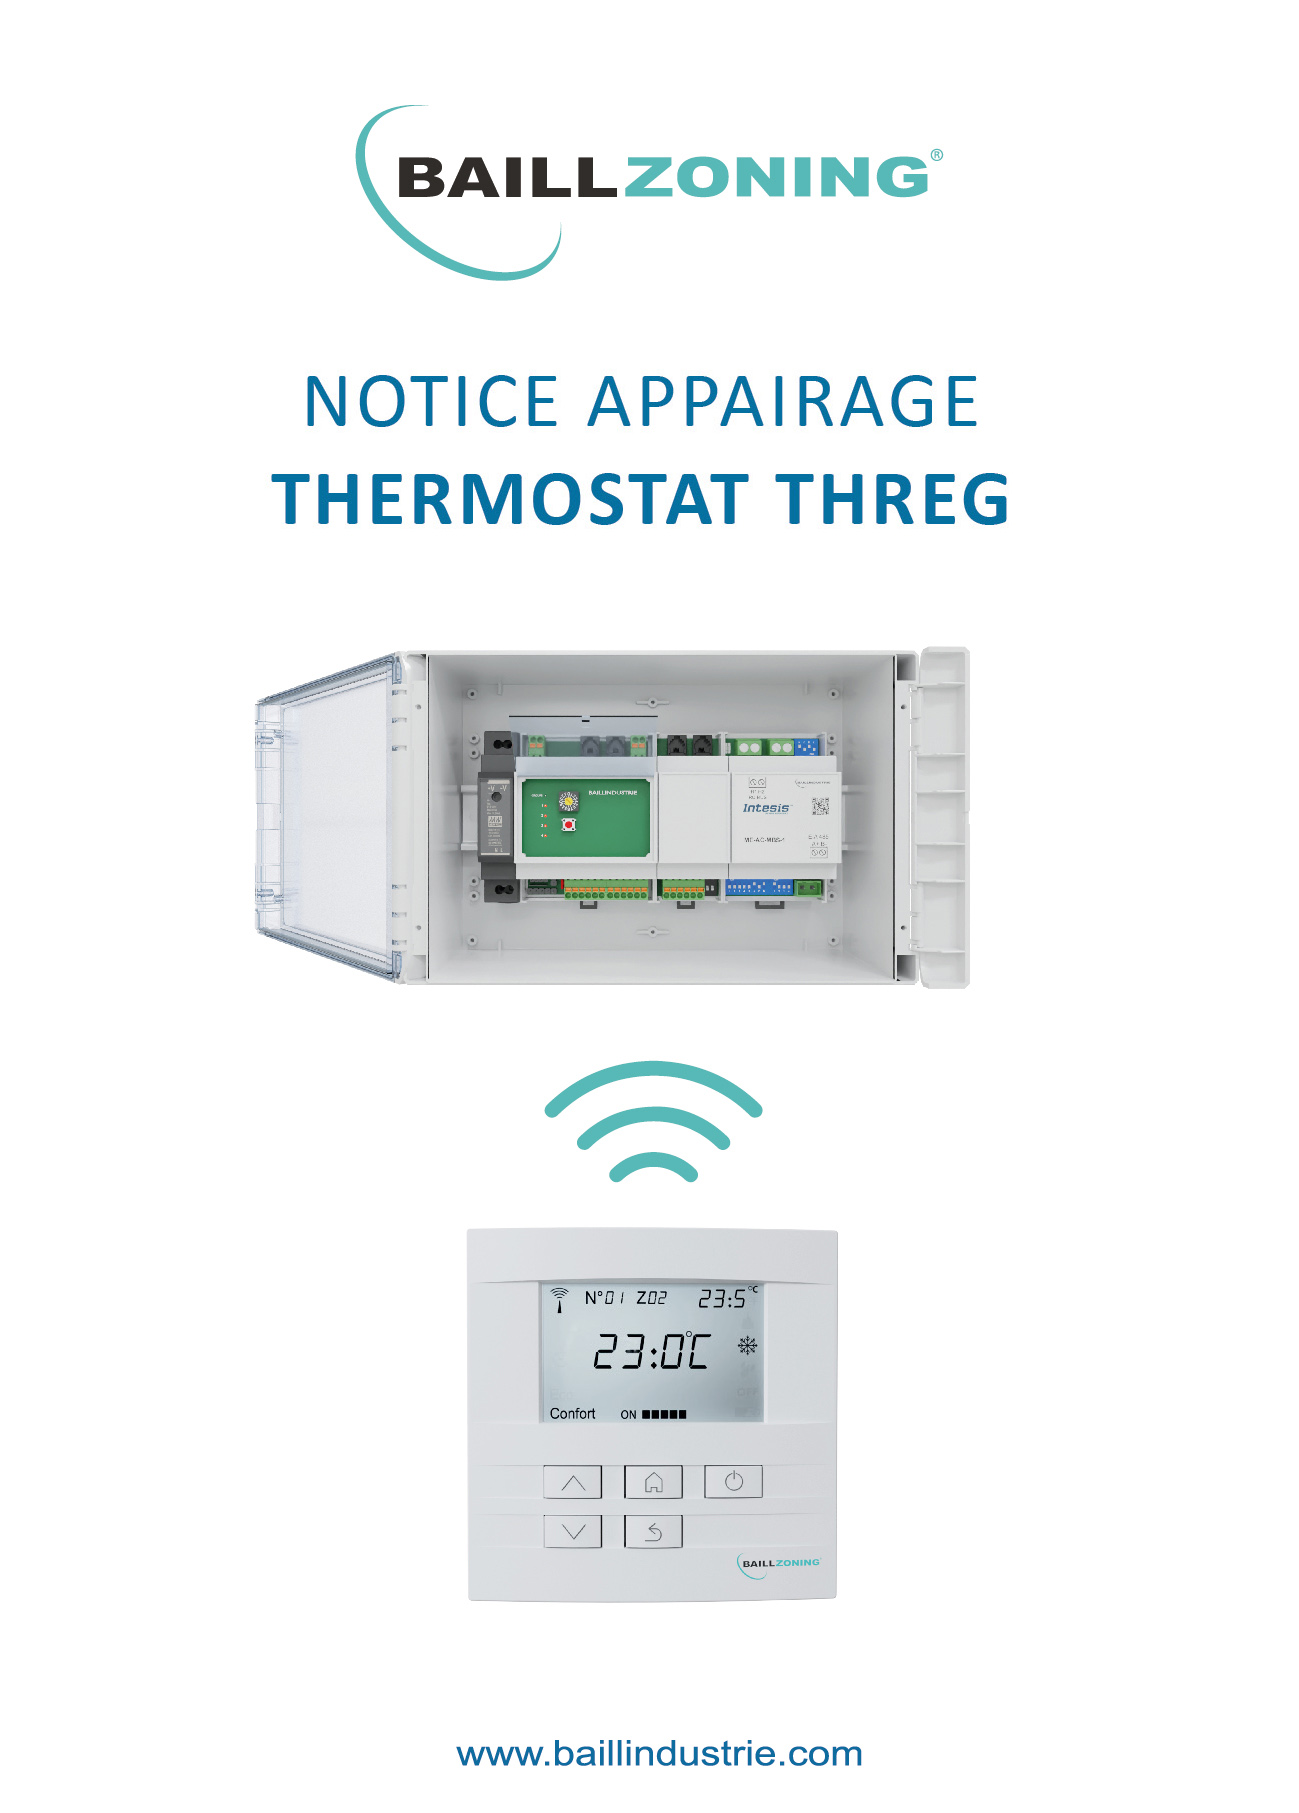 
                                                    Notice d'appairage Thermostat
                                                    